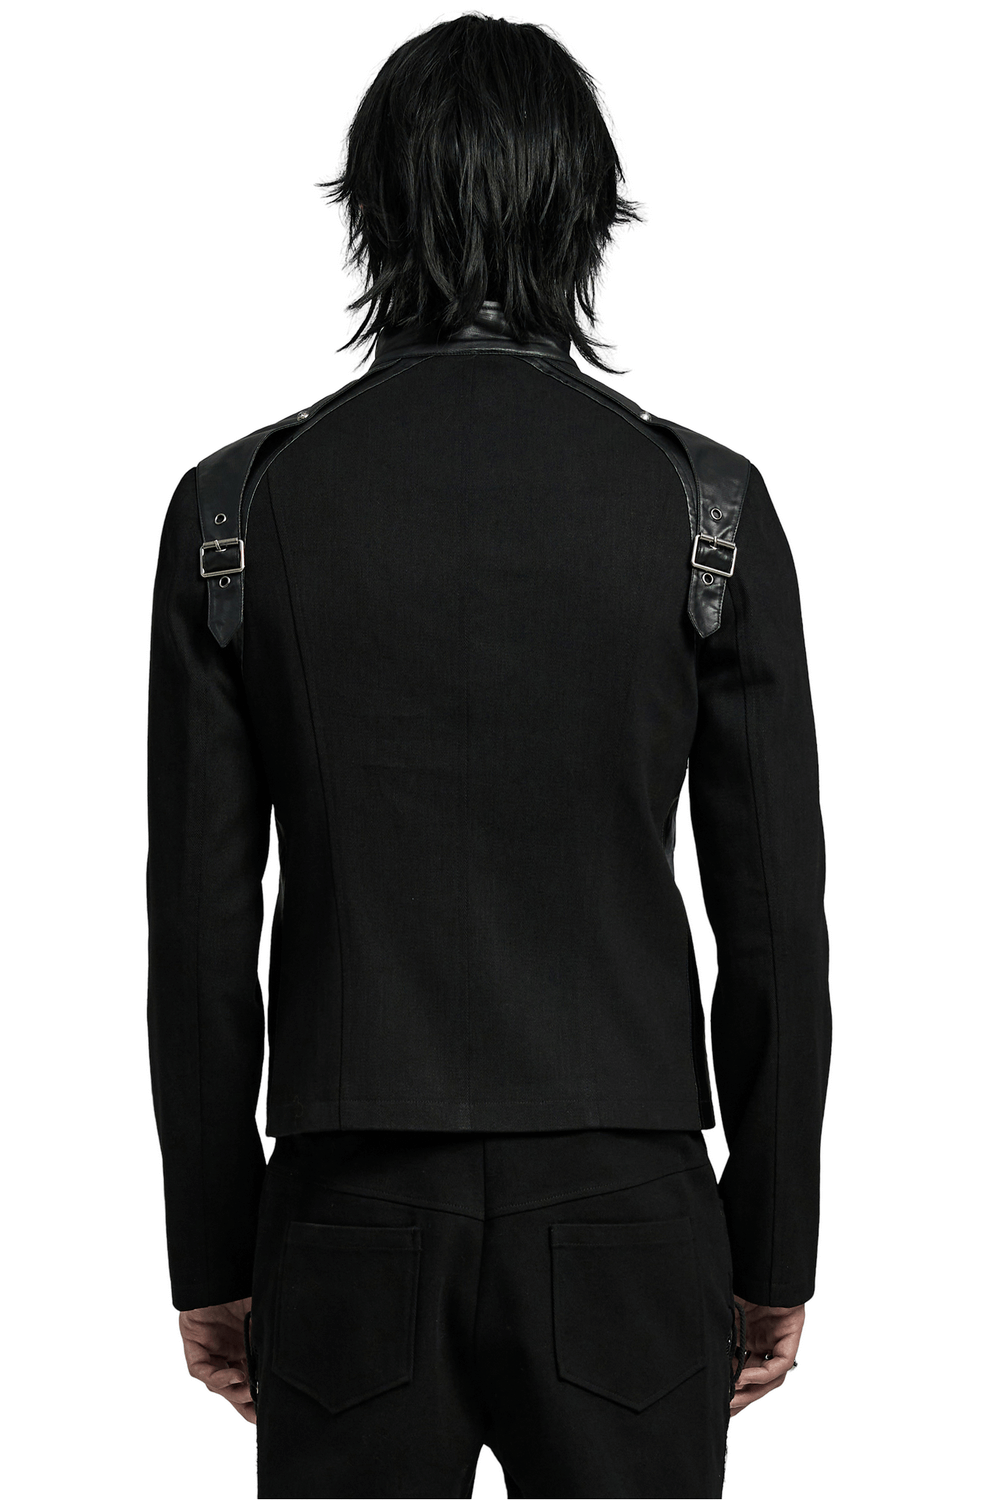 Men's Black Punk Jacket with Buckles and Zipper